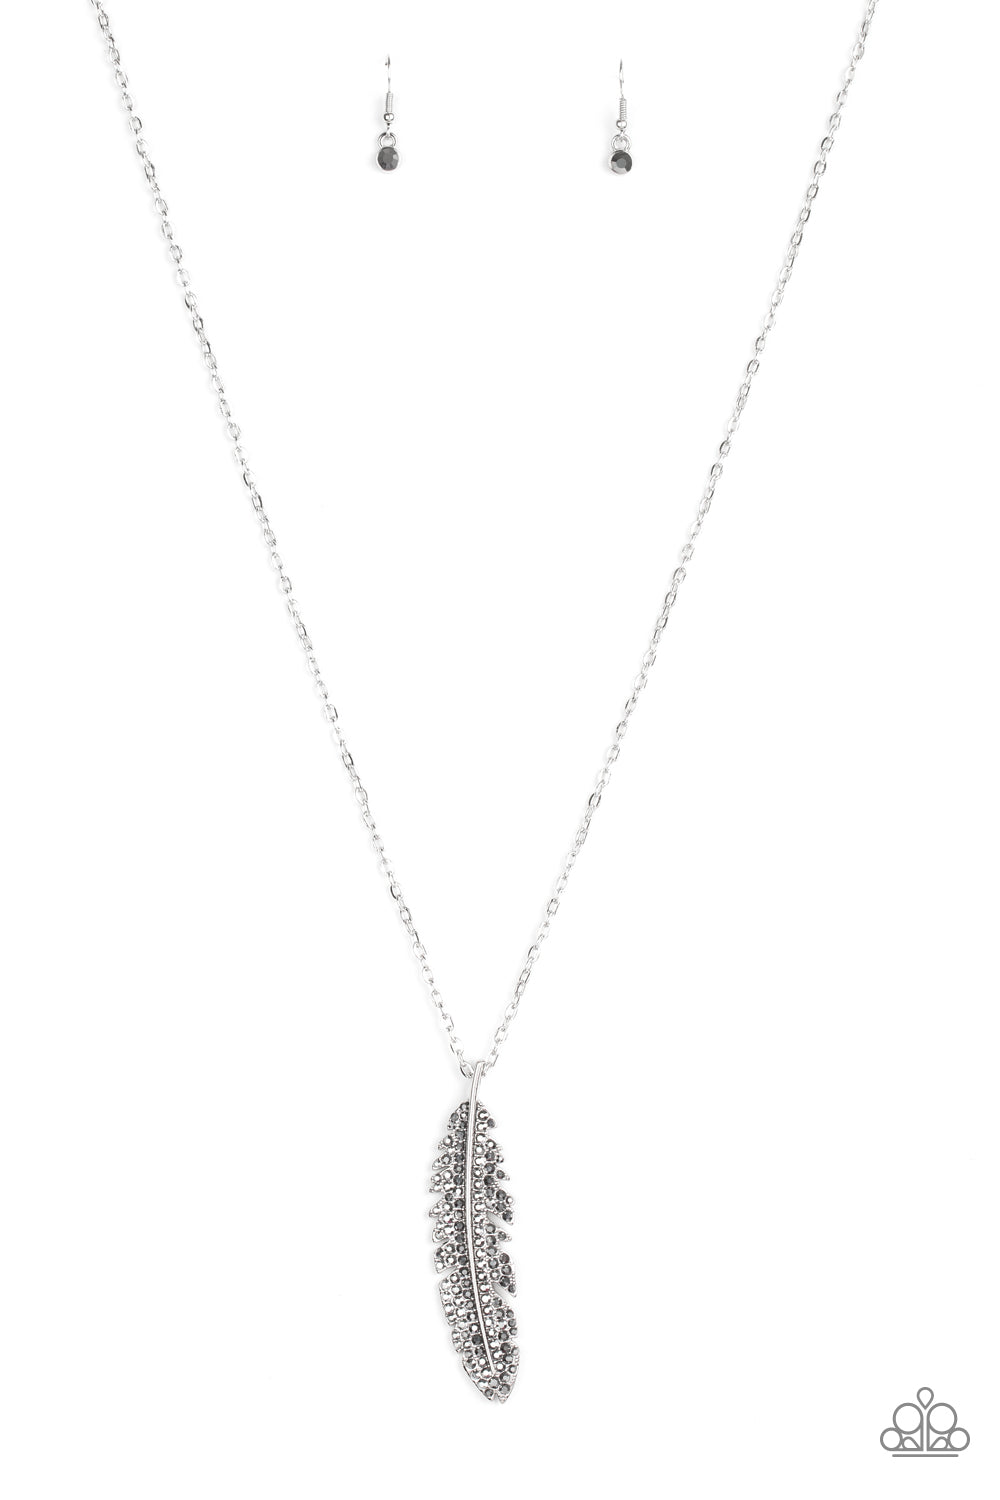 Soaring High Silver Necklace